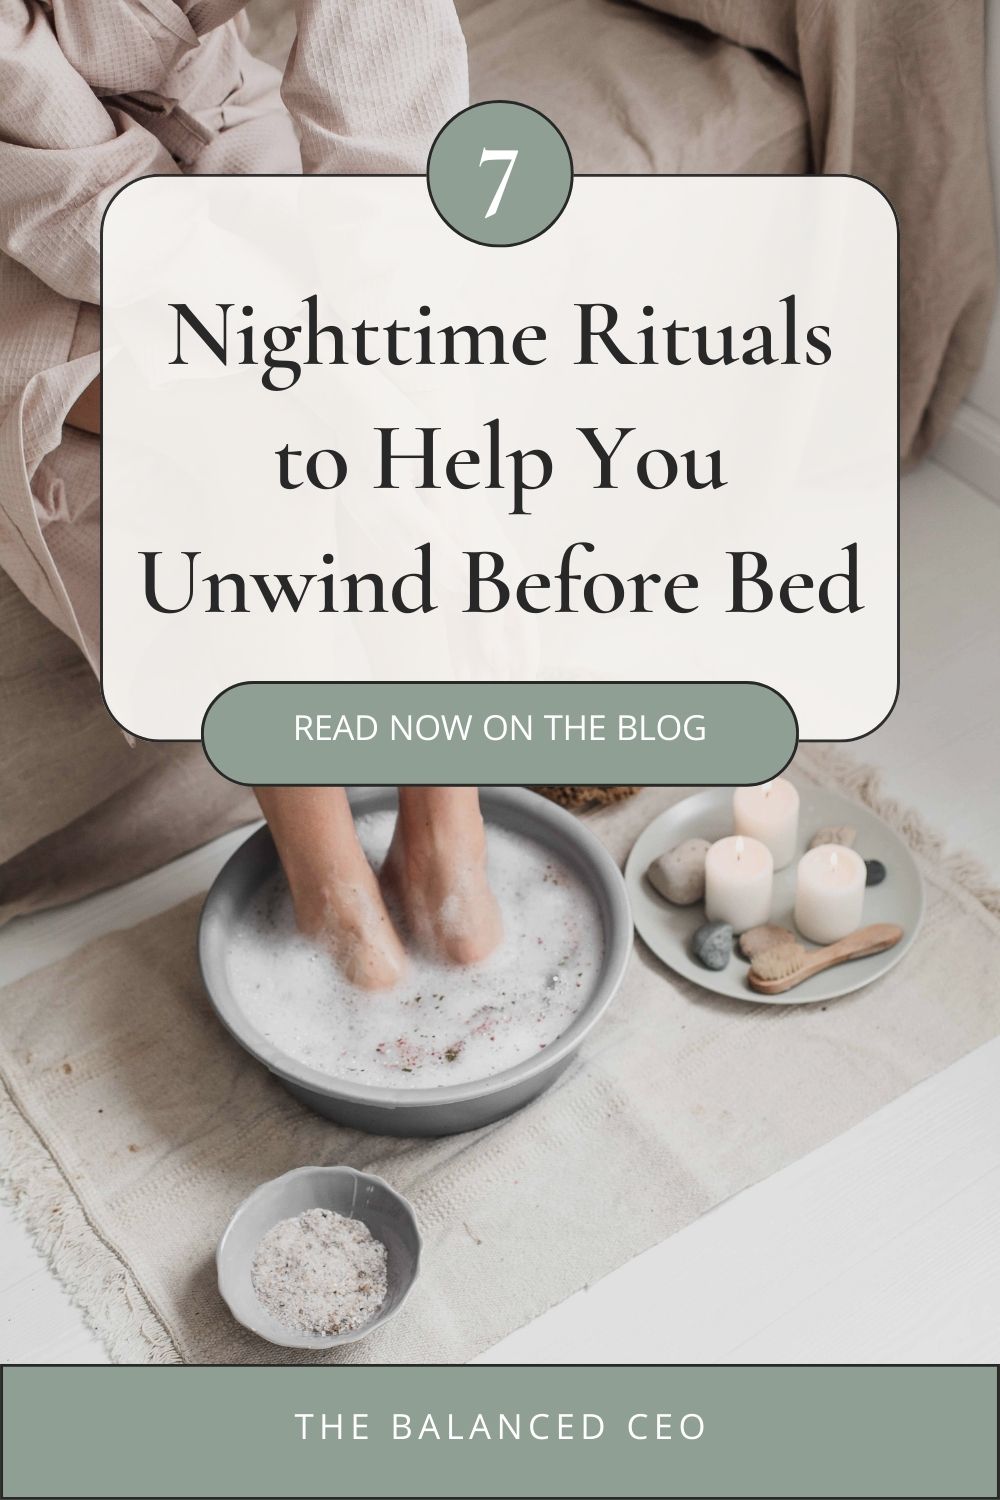 7 Nighttime Rituals to Help You Unwind Before Bed